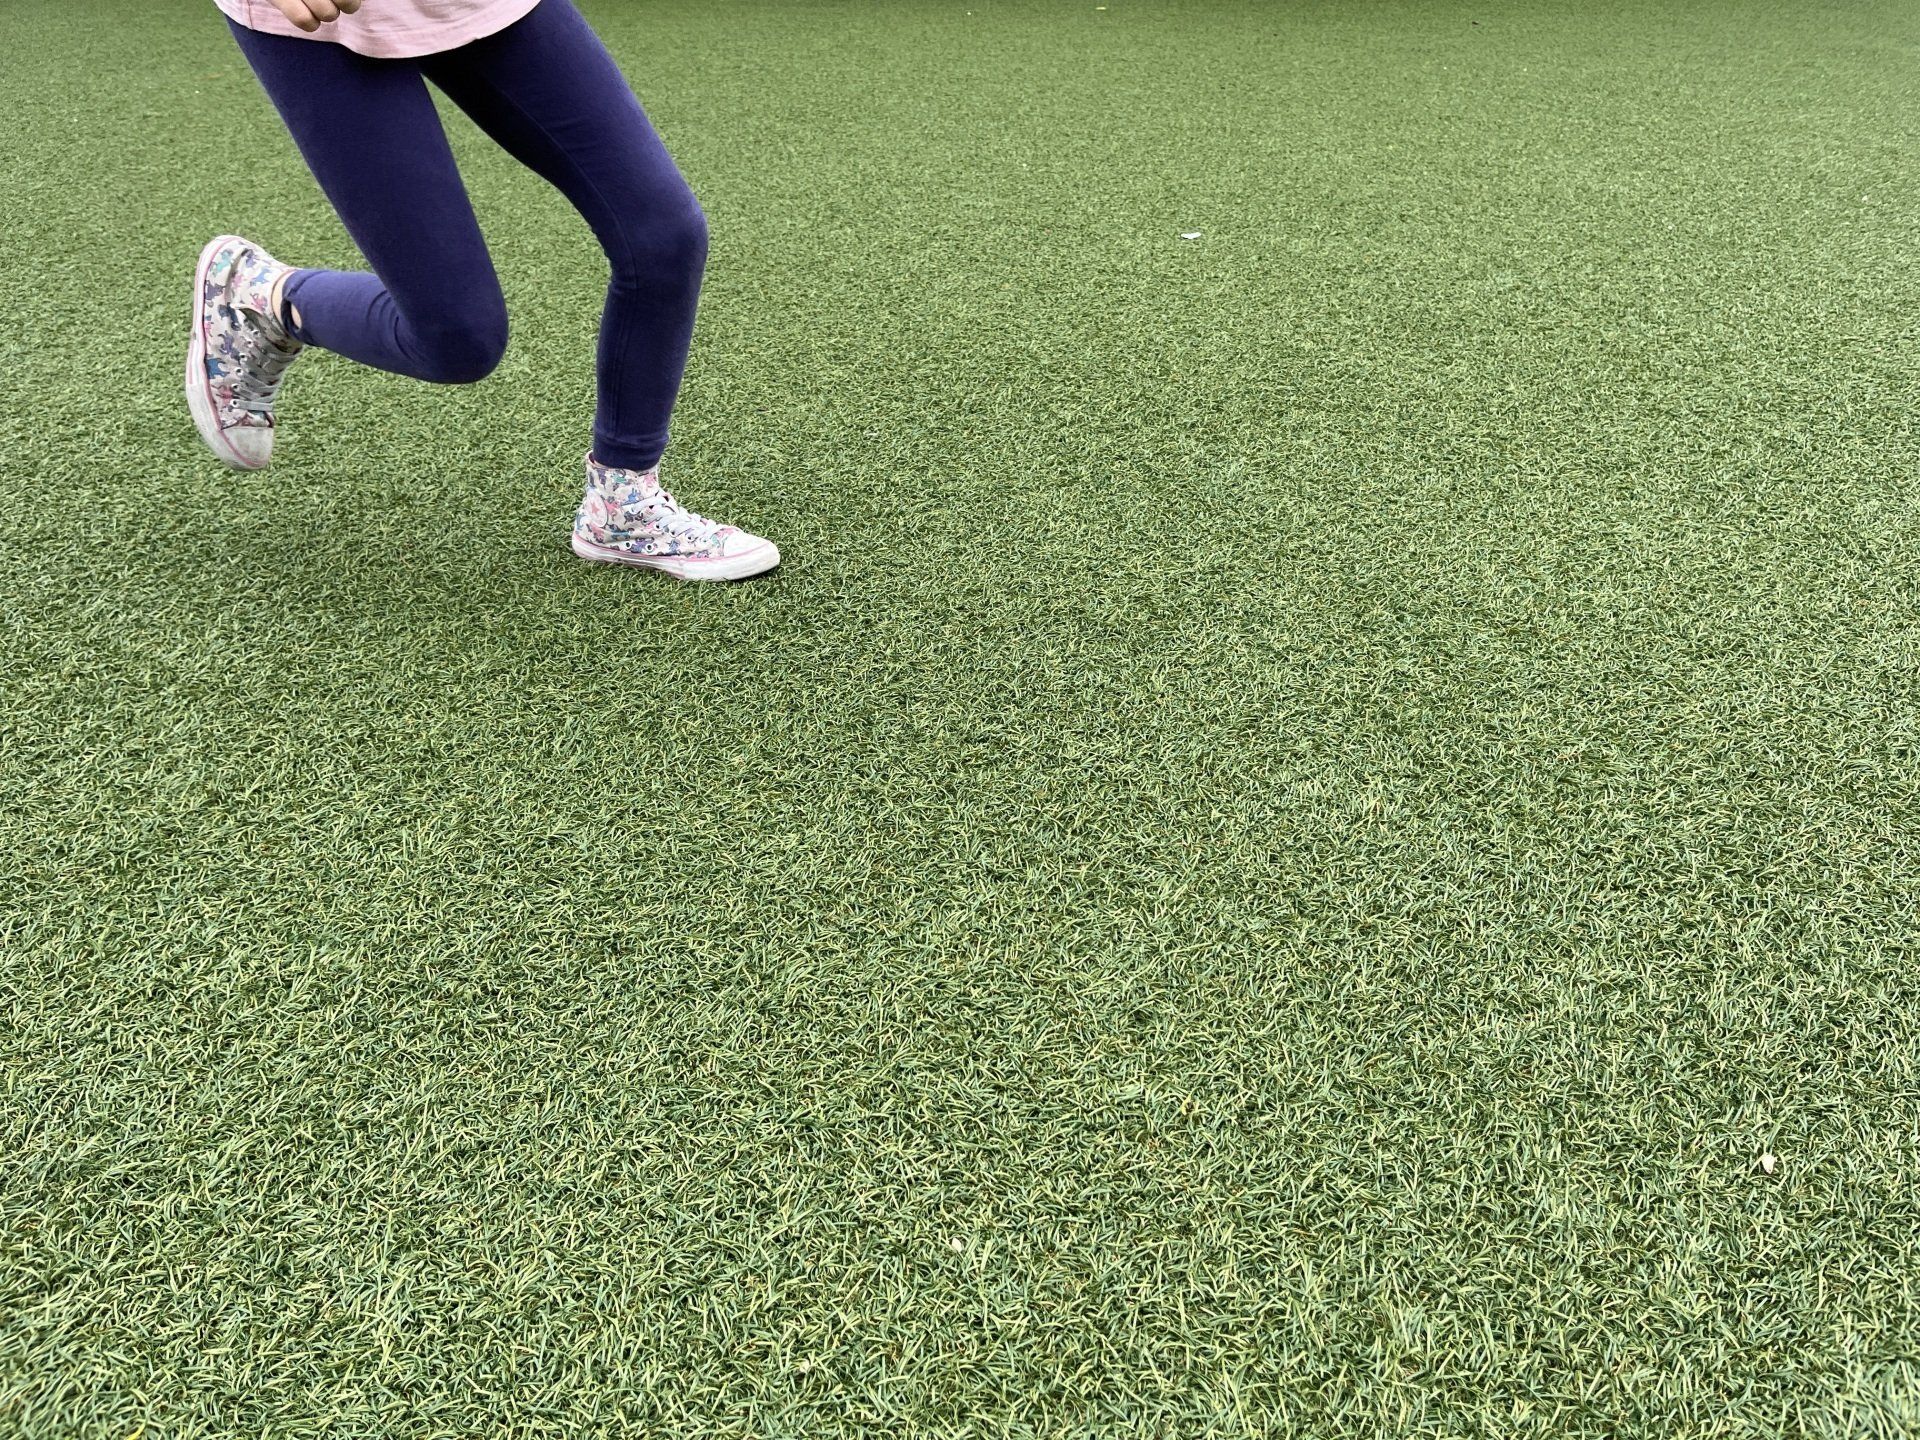 running kid's feet on artificial lawn, playing in yard